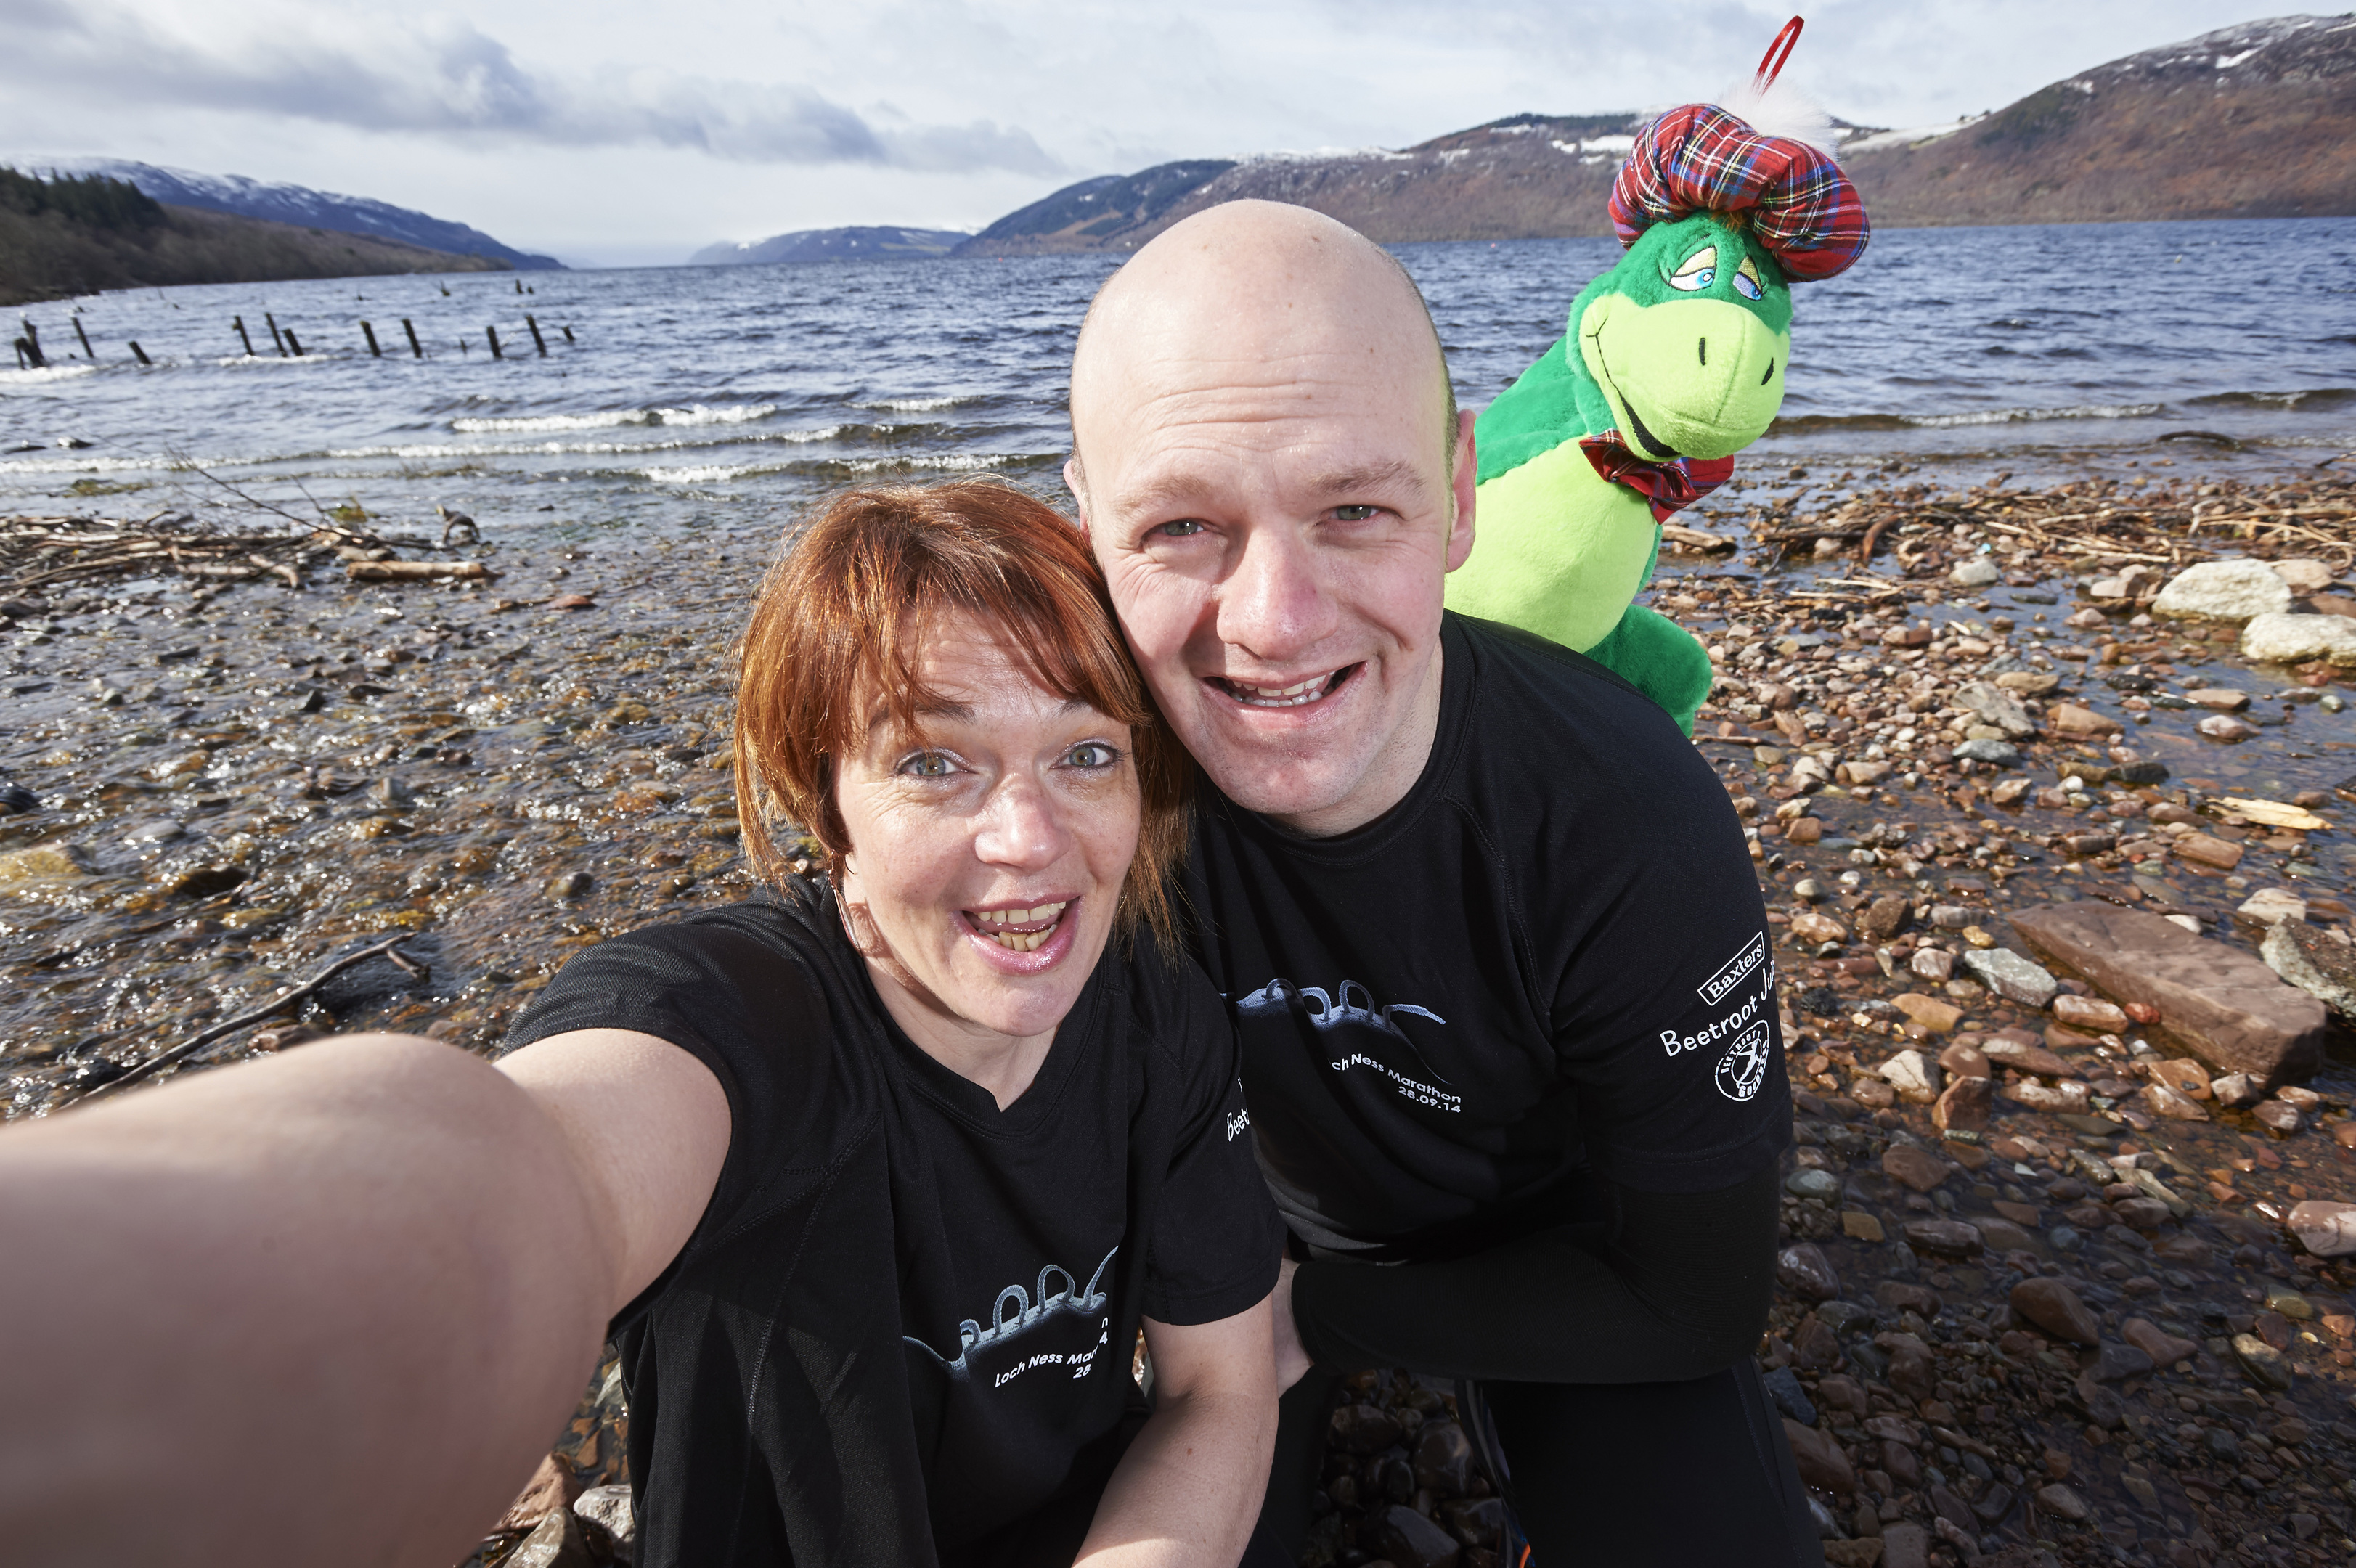 Runners Gordon Lloyd and Diana Mitchell are encouraging runners in the Baxters Loch Ness Marathon and Festival of Running to help track down Nessie in a selfie.